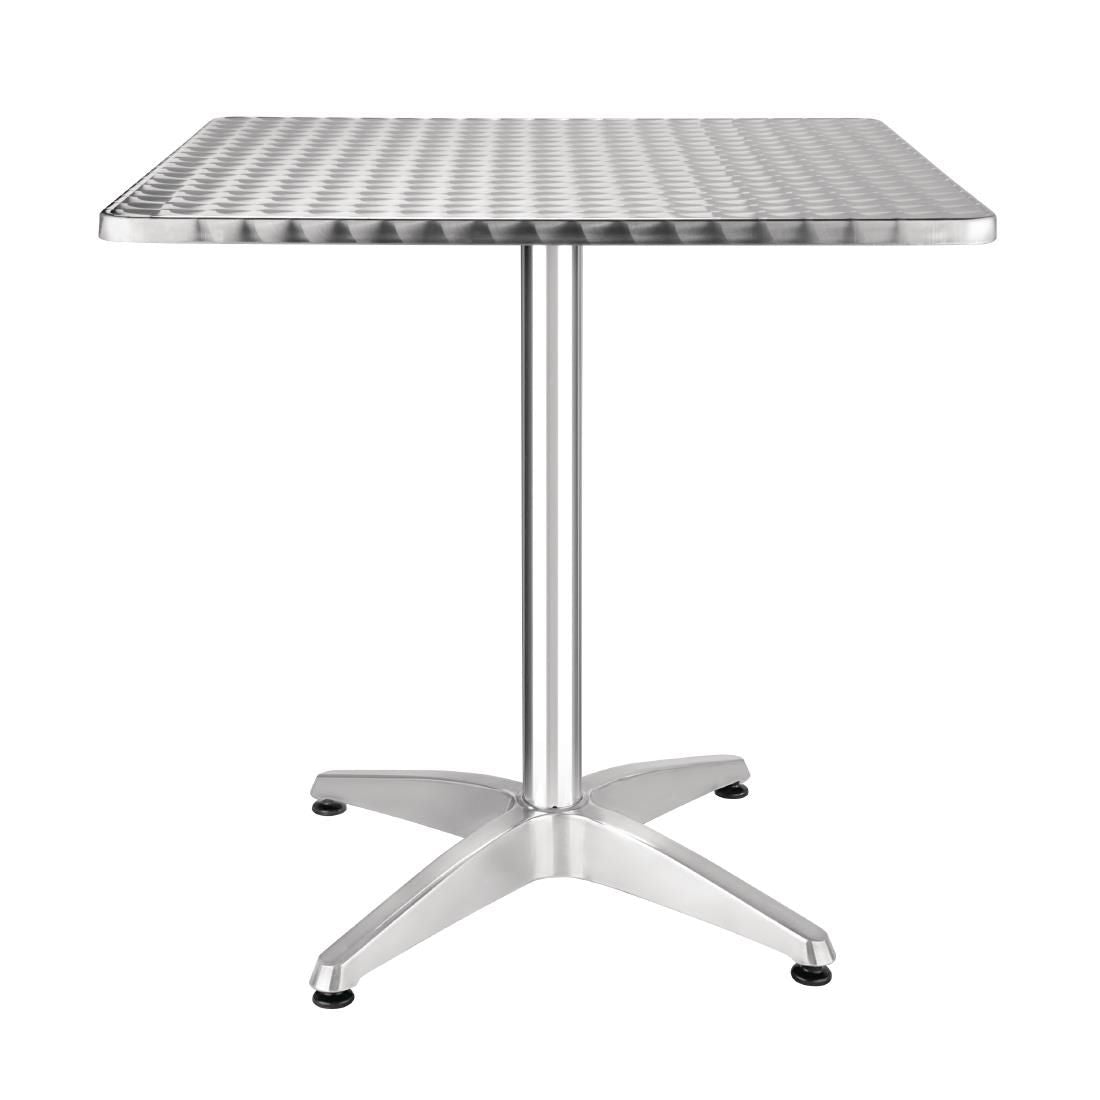 Bolero Square Stainless Steel Bistro Table 700mm (Single) JD Catering Equipment Solutions Ltd